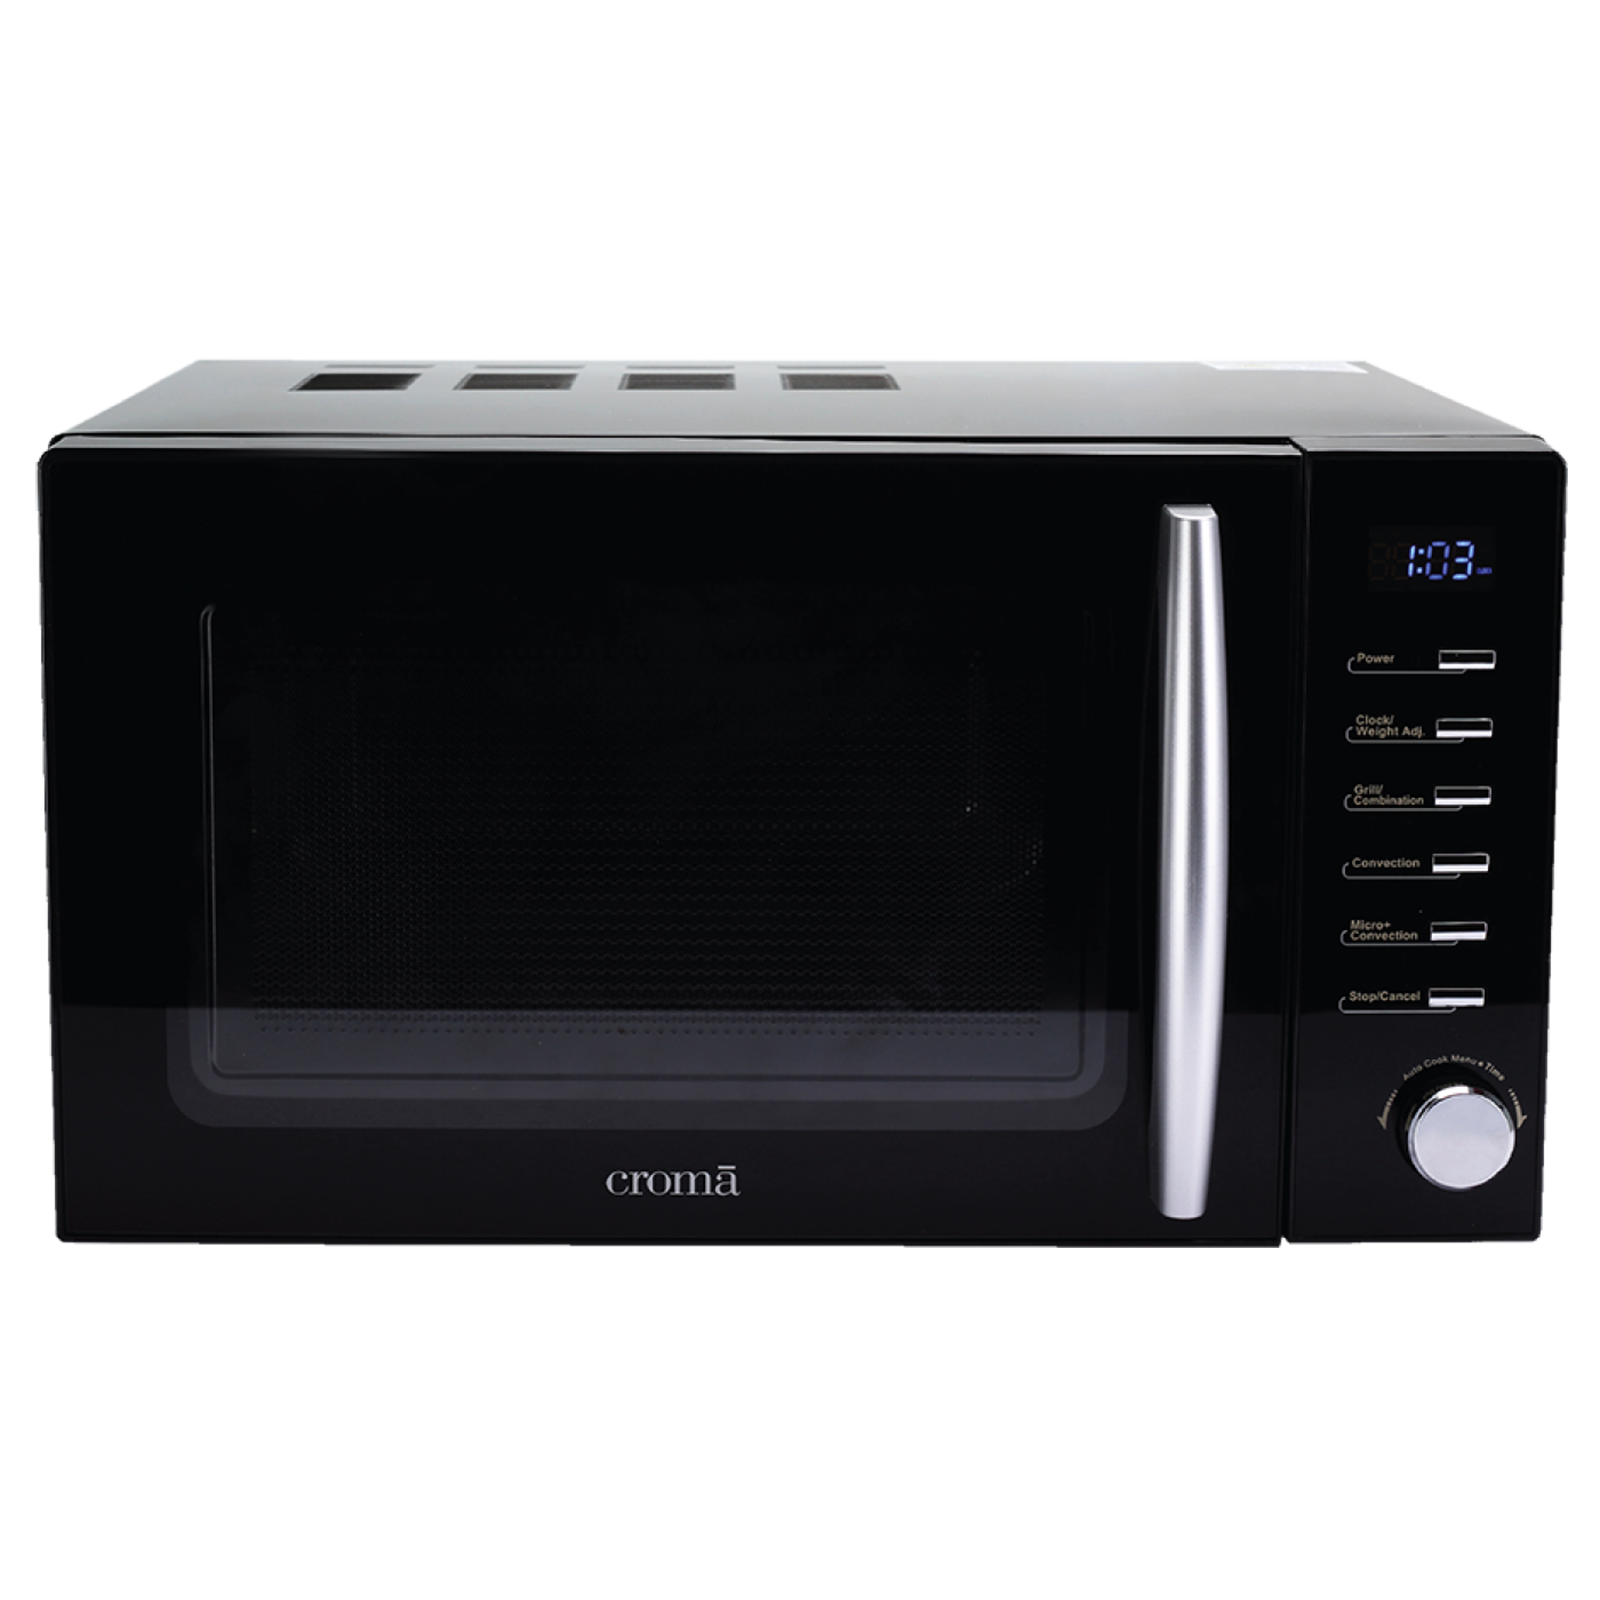 Croma 20 Litres Convection Microwave Oven (Barbeque Function, CRAM0193, Black)_1